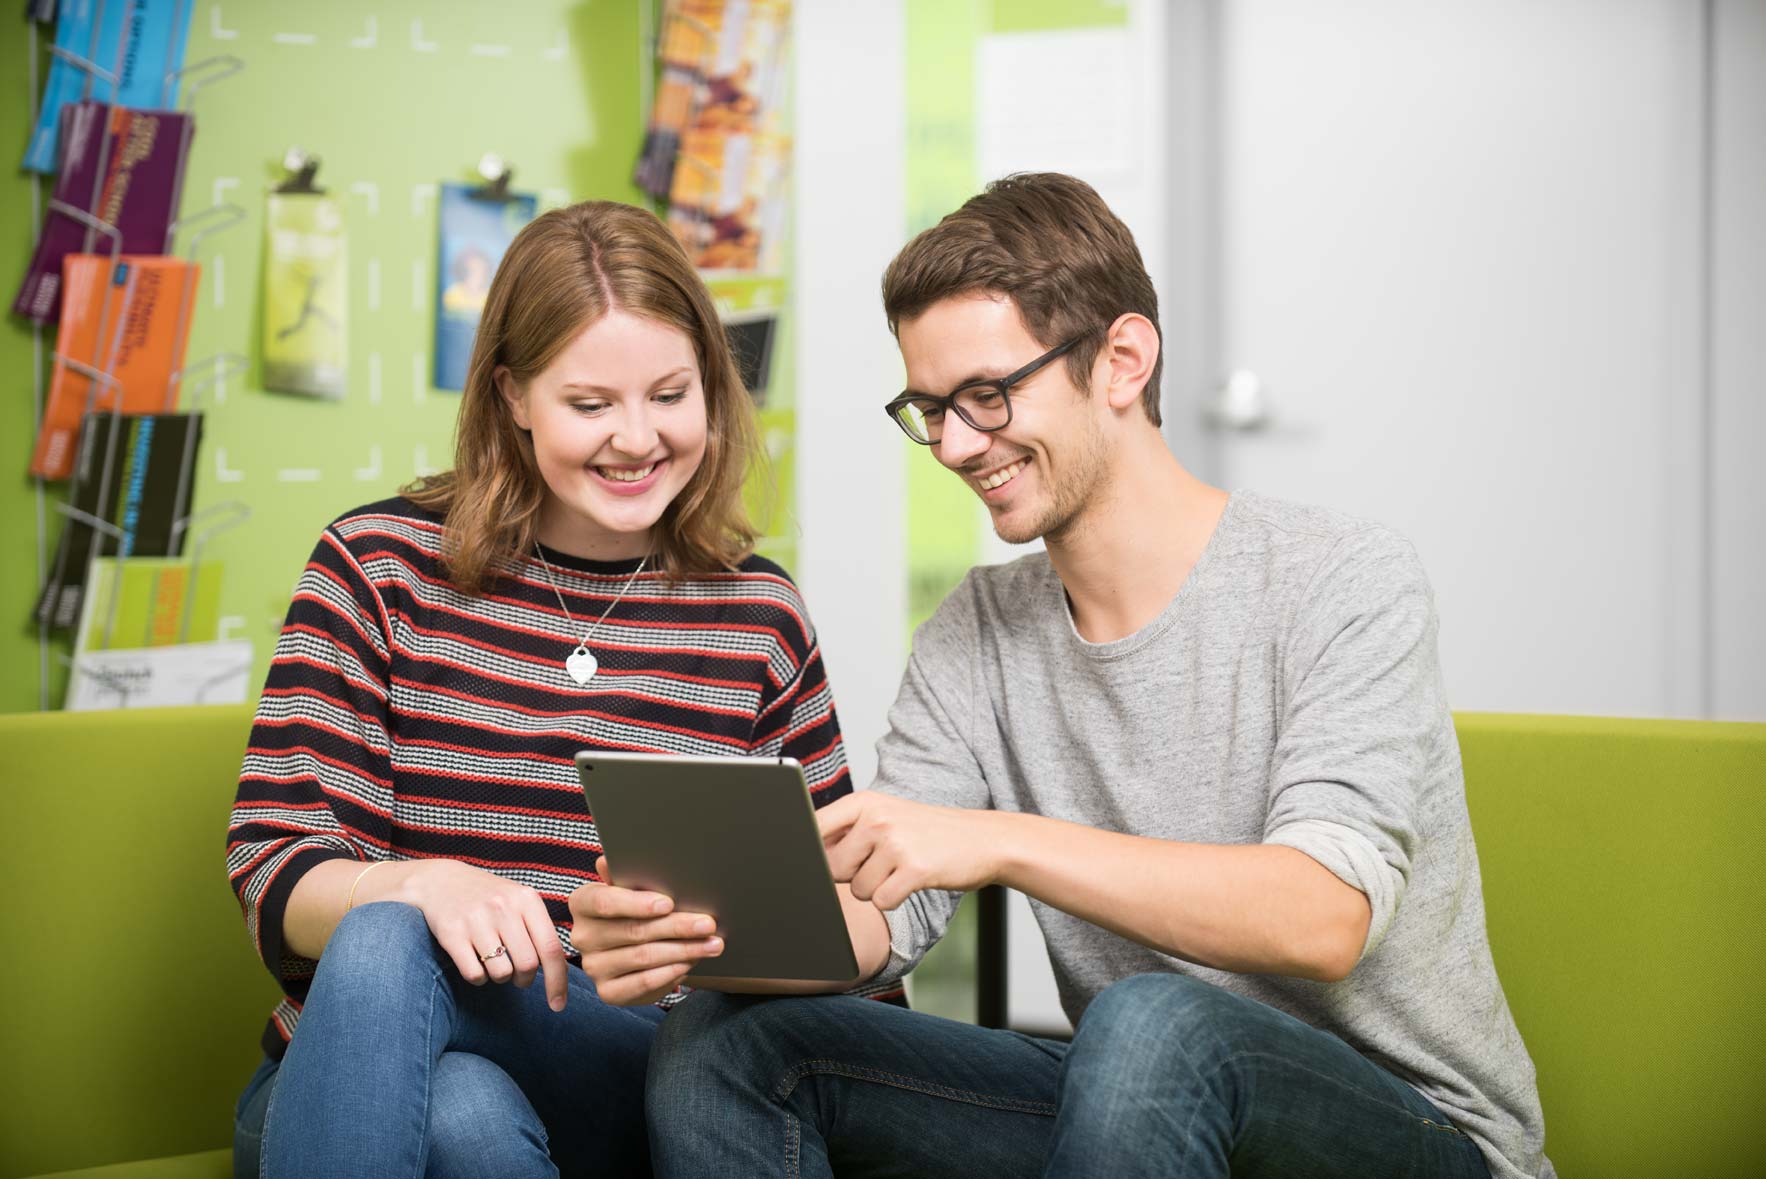 Two students smiling while holding a tablet device